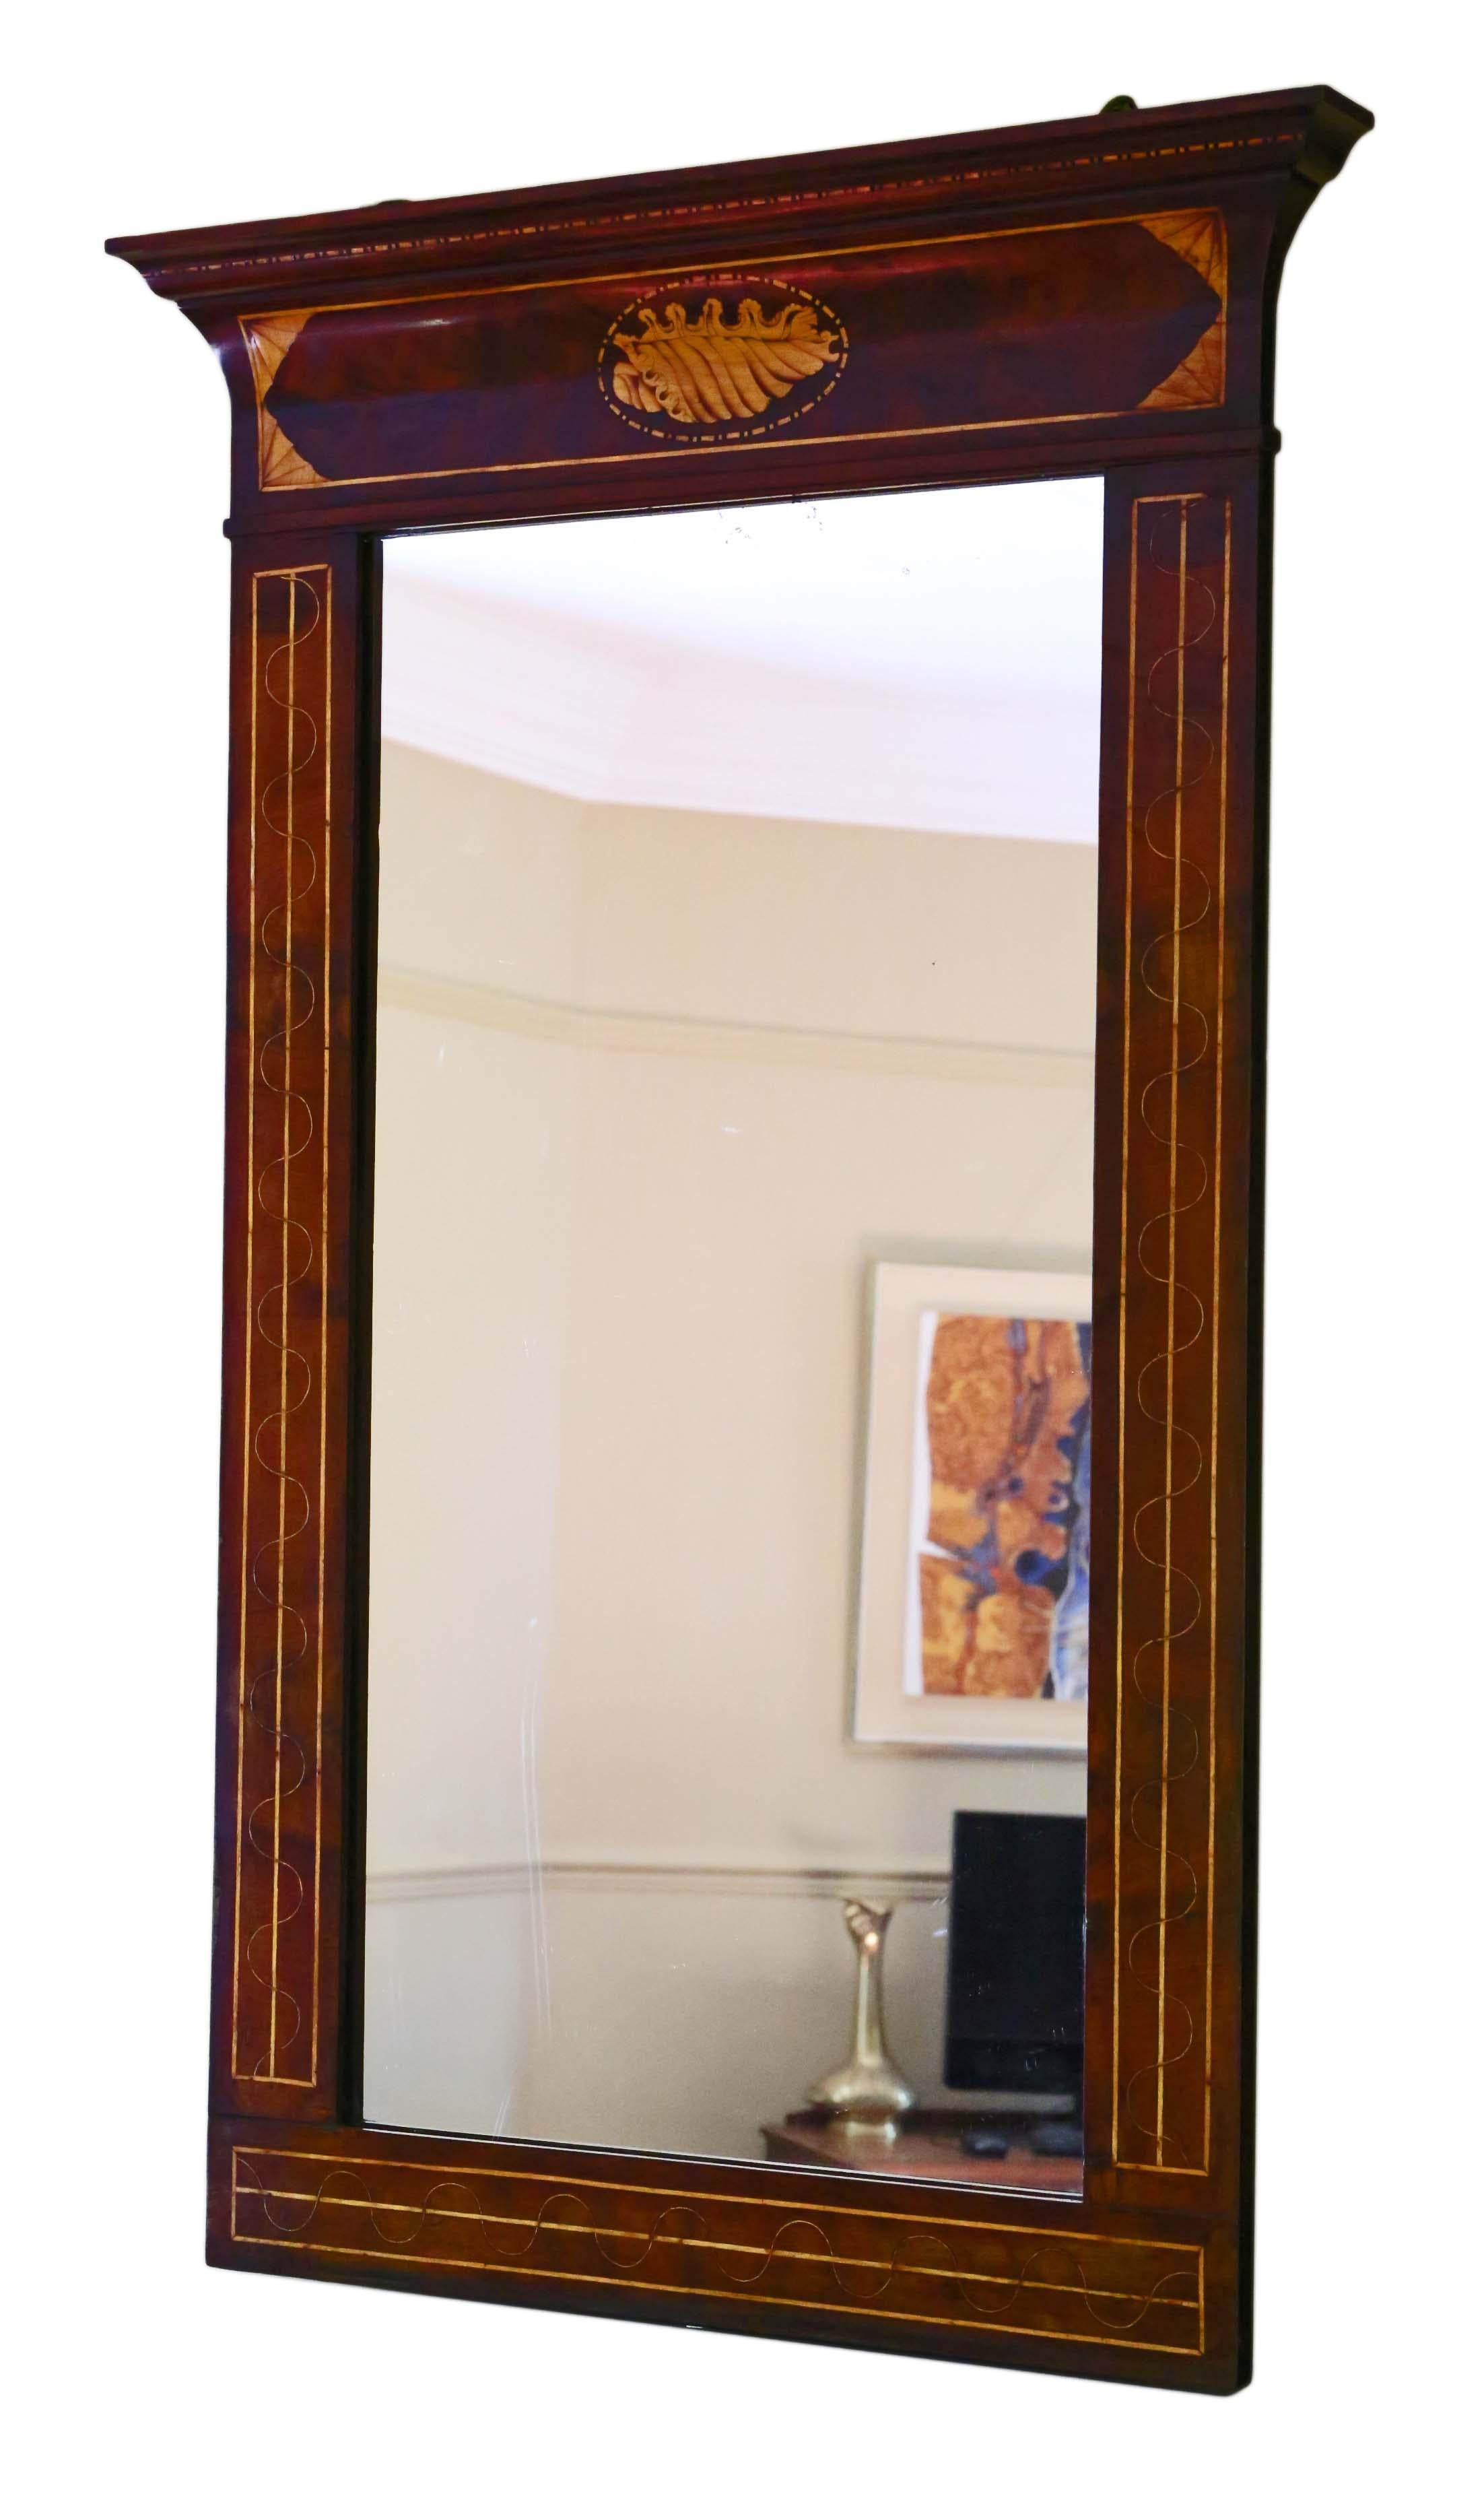 Antique large fine quality Georgian circa 1820 mahogany overmantle wall mirror.

This is a lovely mirror, that is full of age and charm, with great proportions.

No loose joints.

A rare find, far better quality than most, that would look